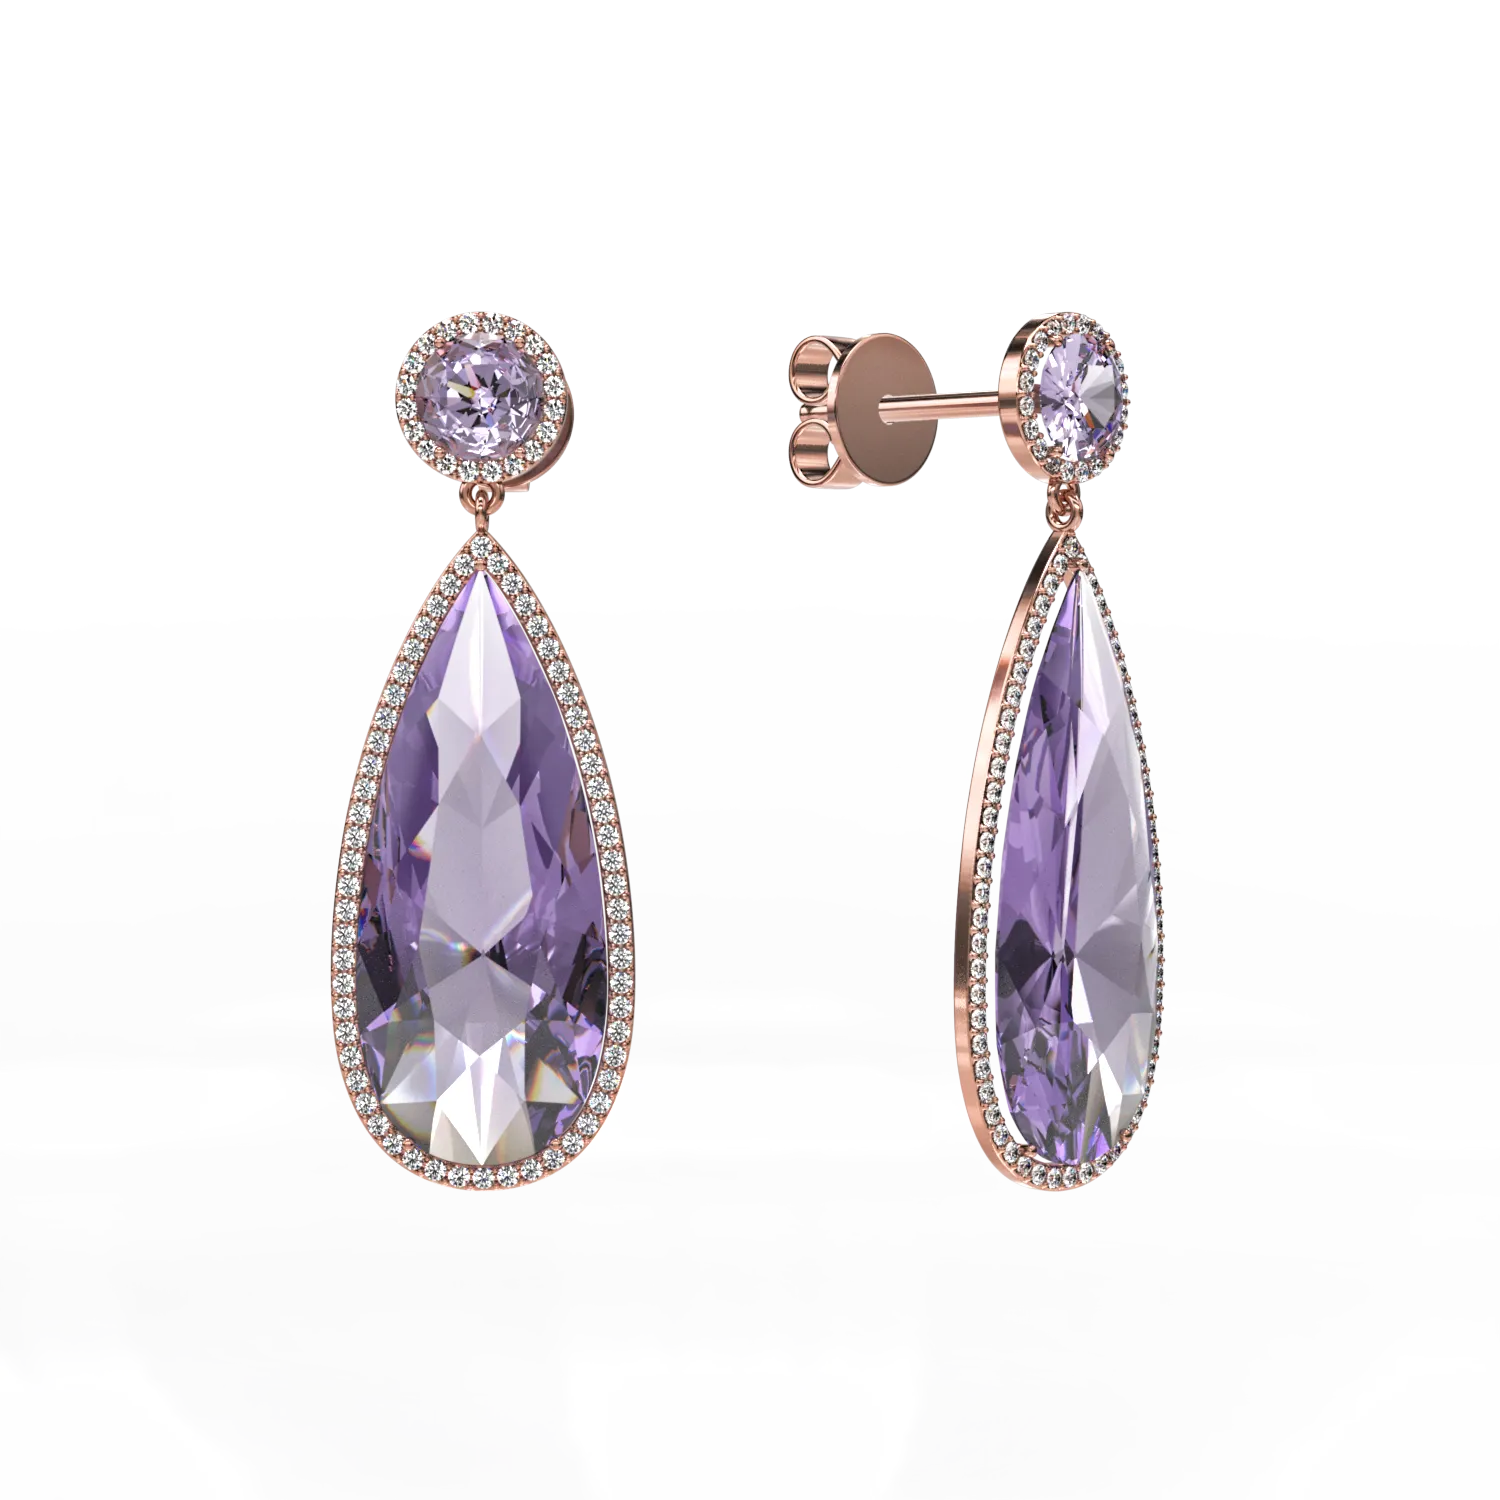 14K rose gold earrings with amethysts of 13.85ct and diamonds of 0.571ct.